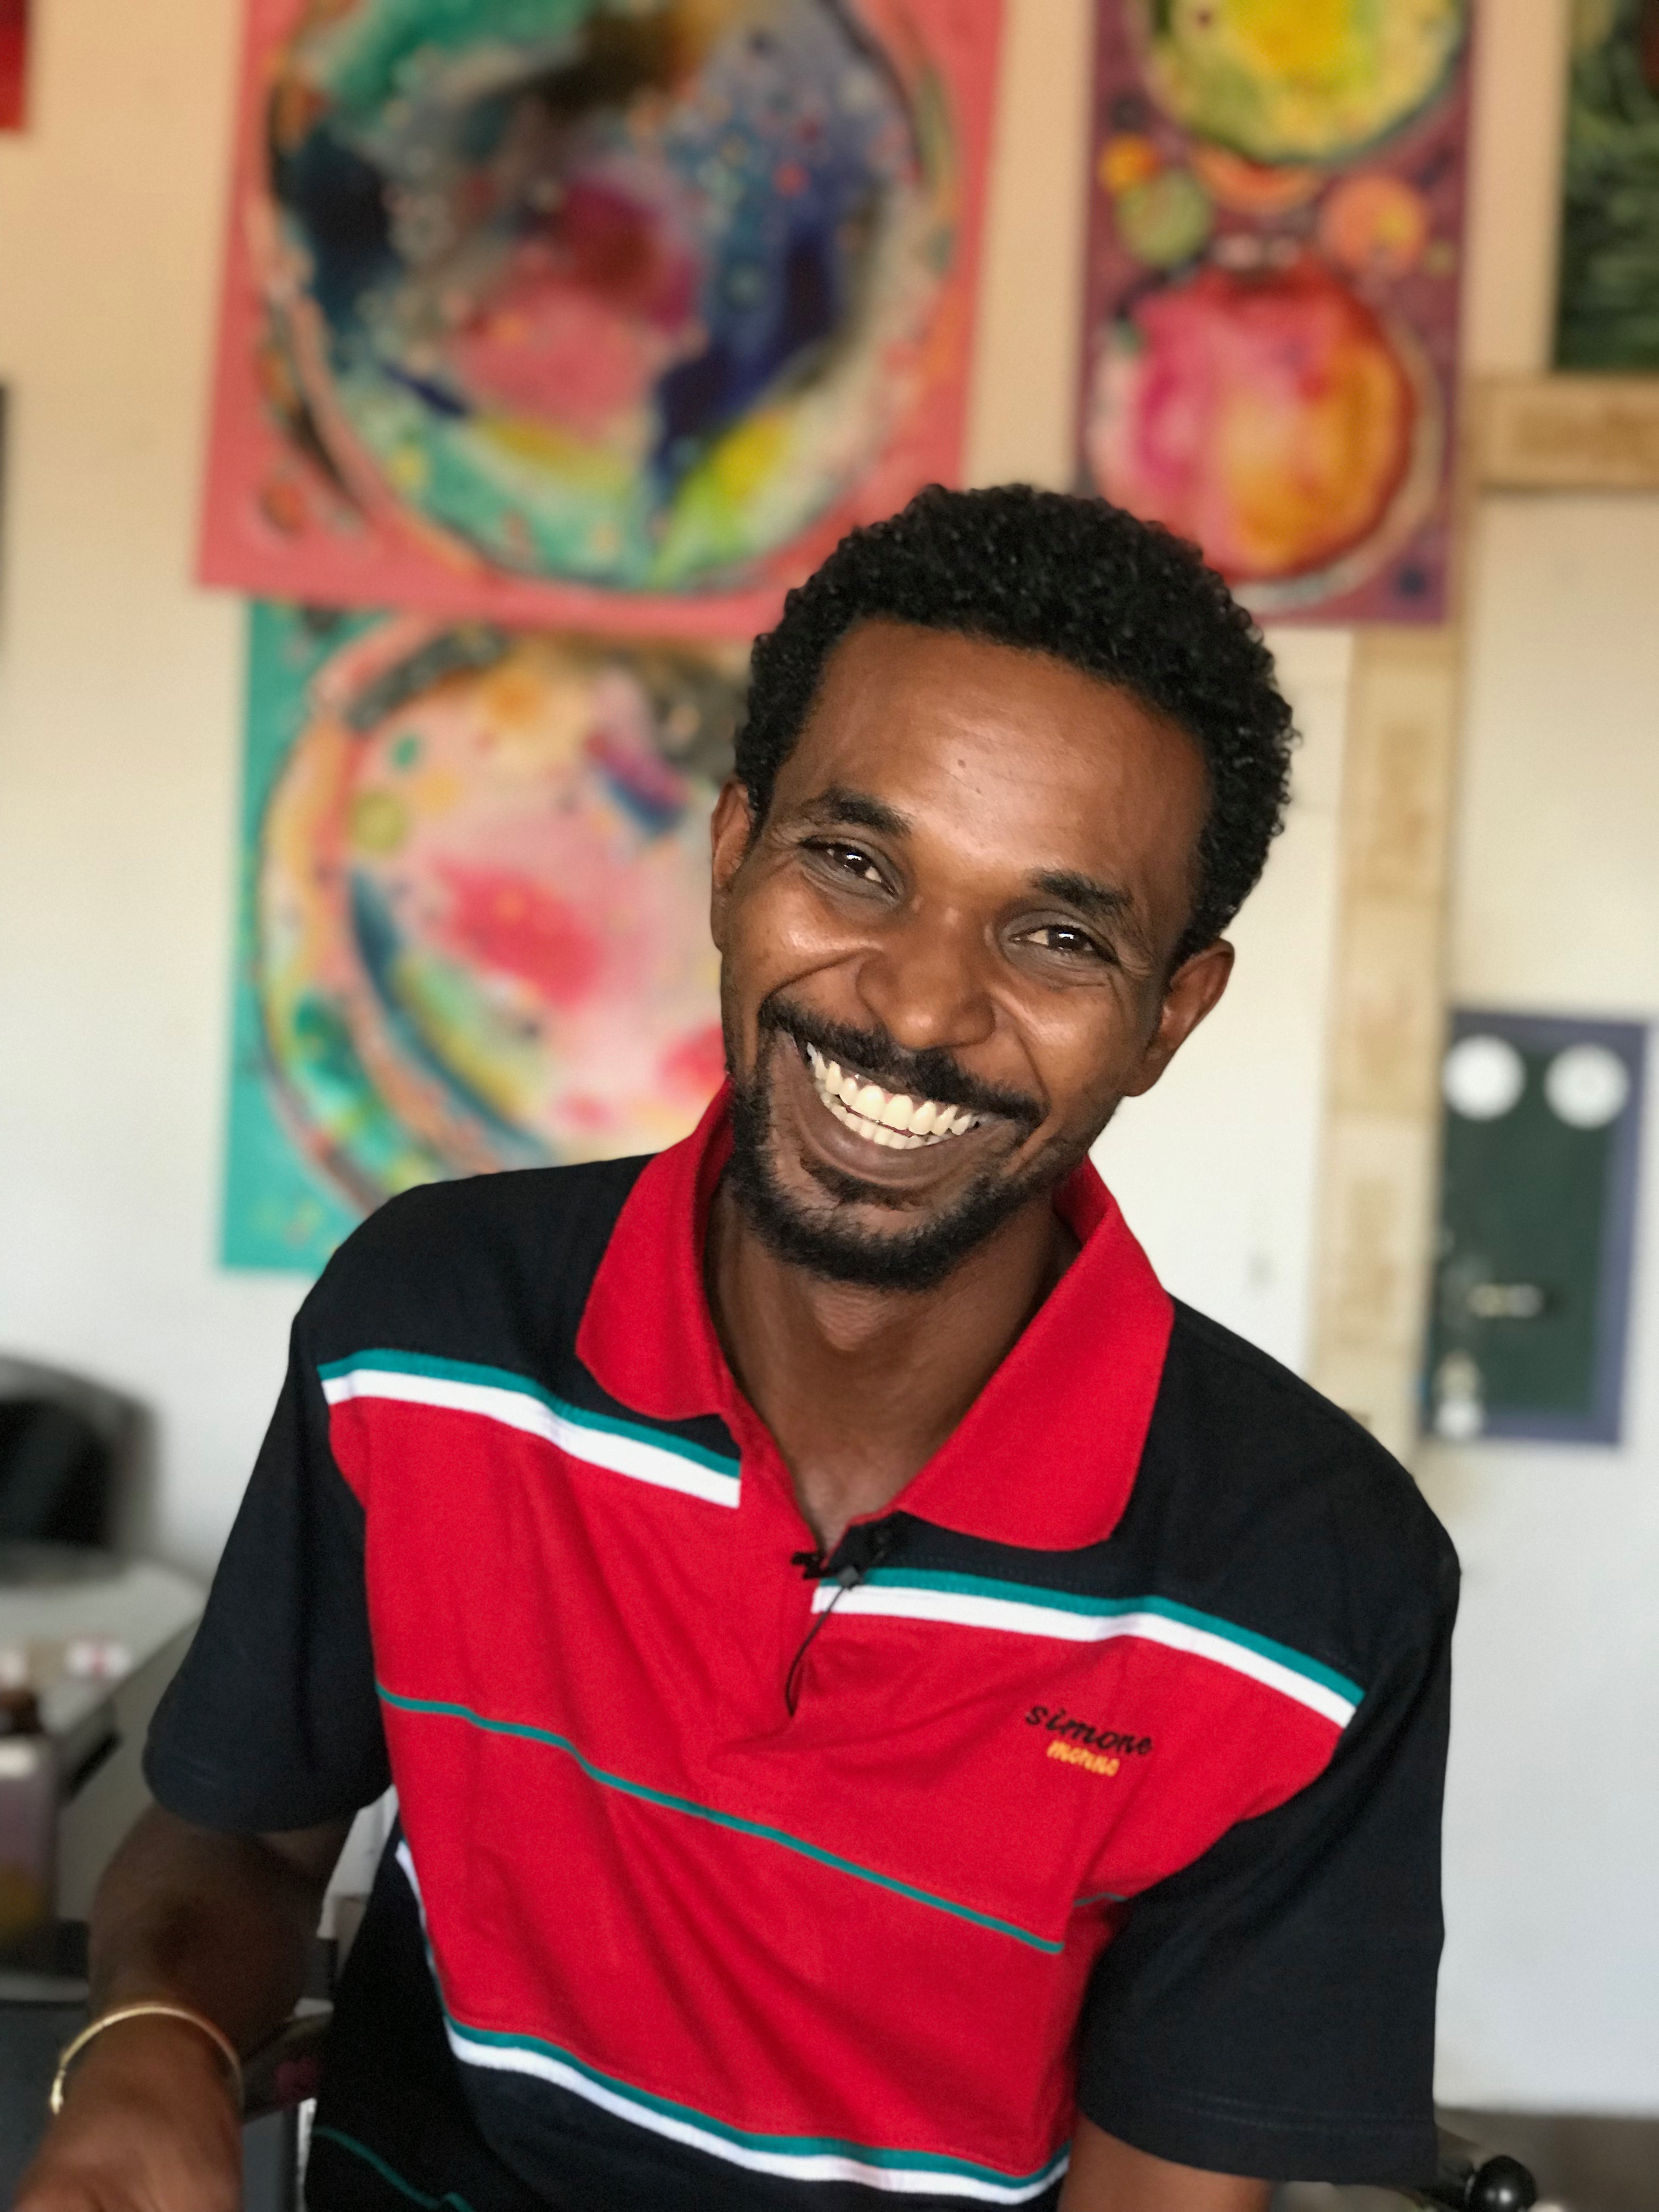 Sudanese Artist Inspires the Masses with His Paintings – CNN (image)